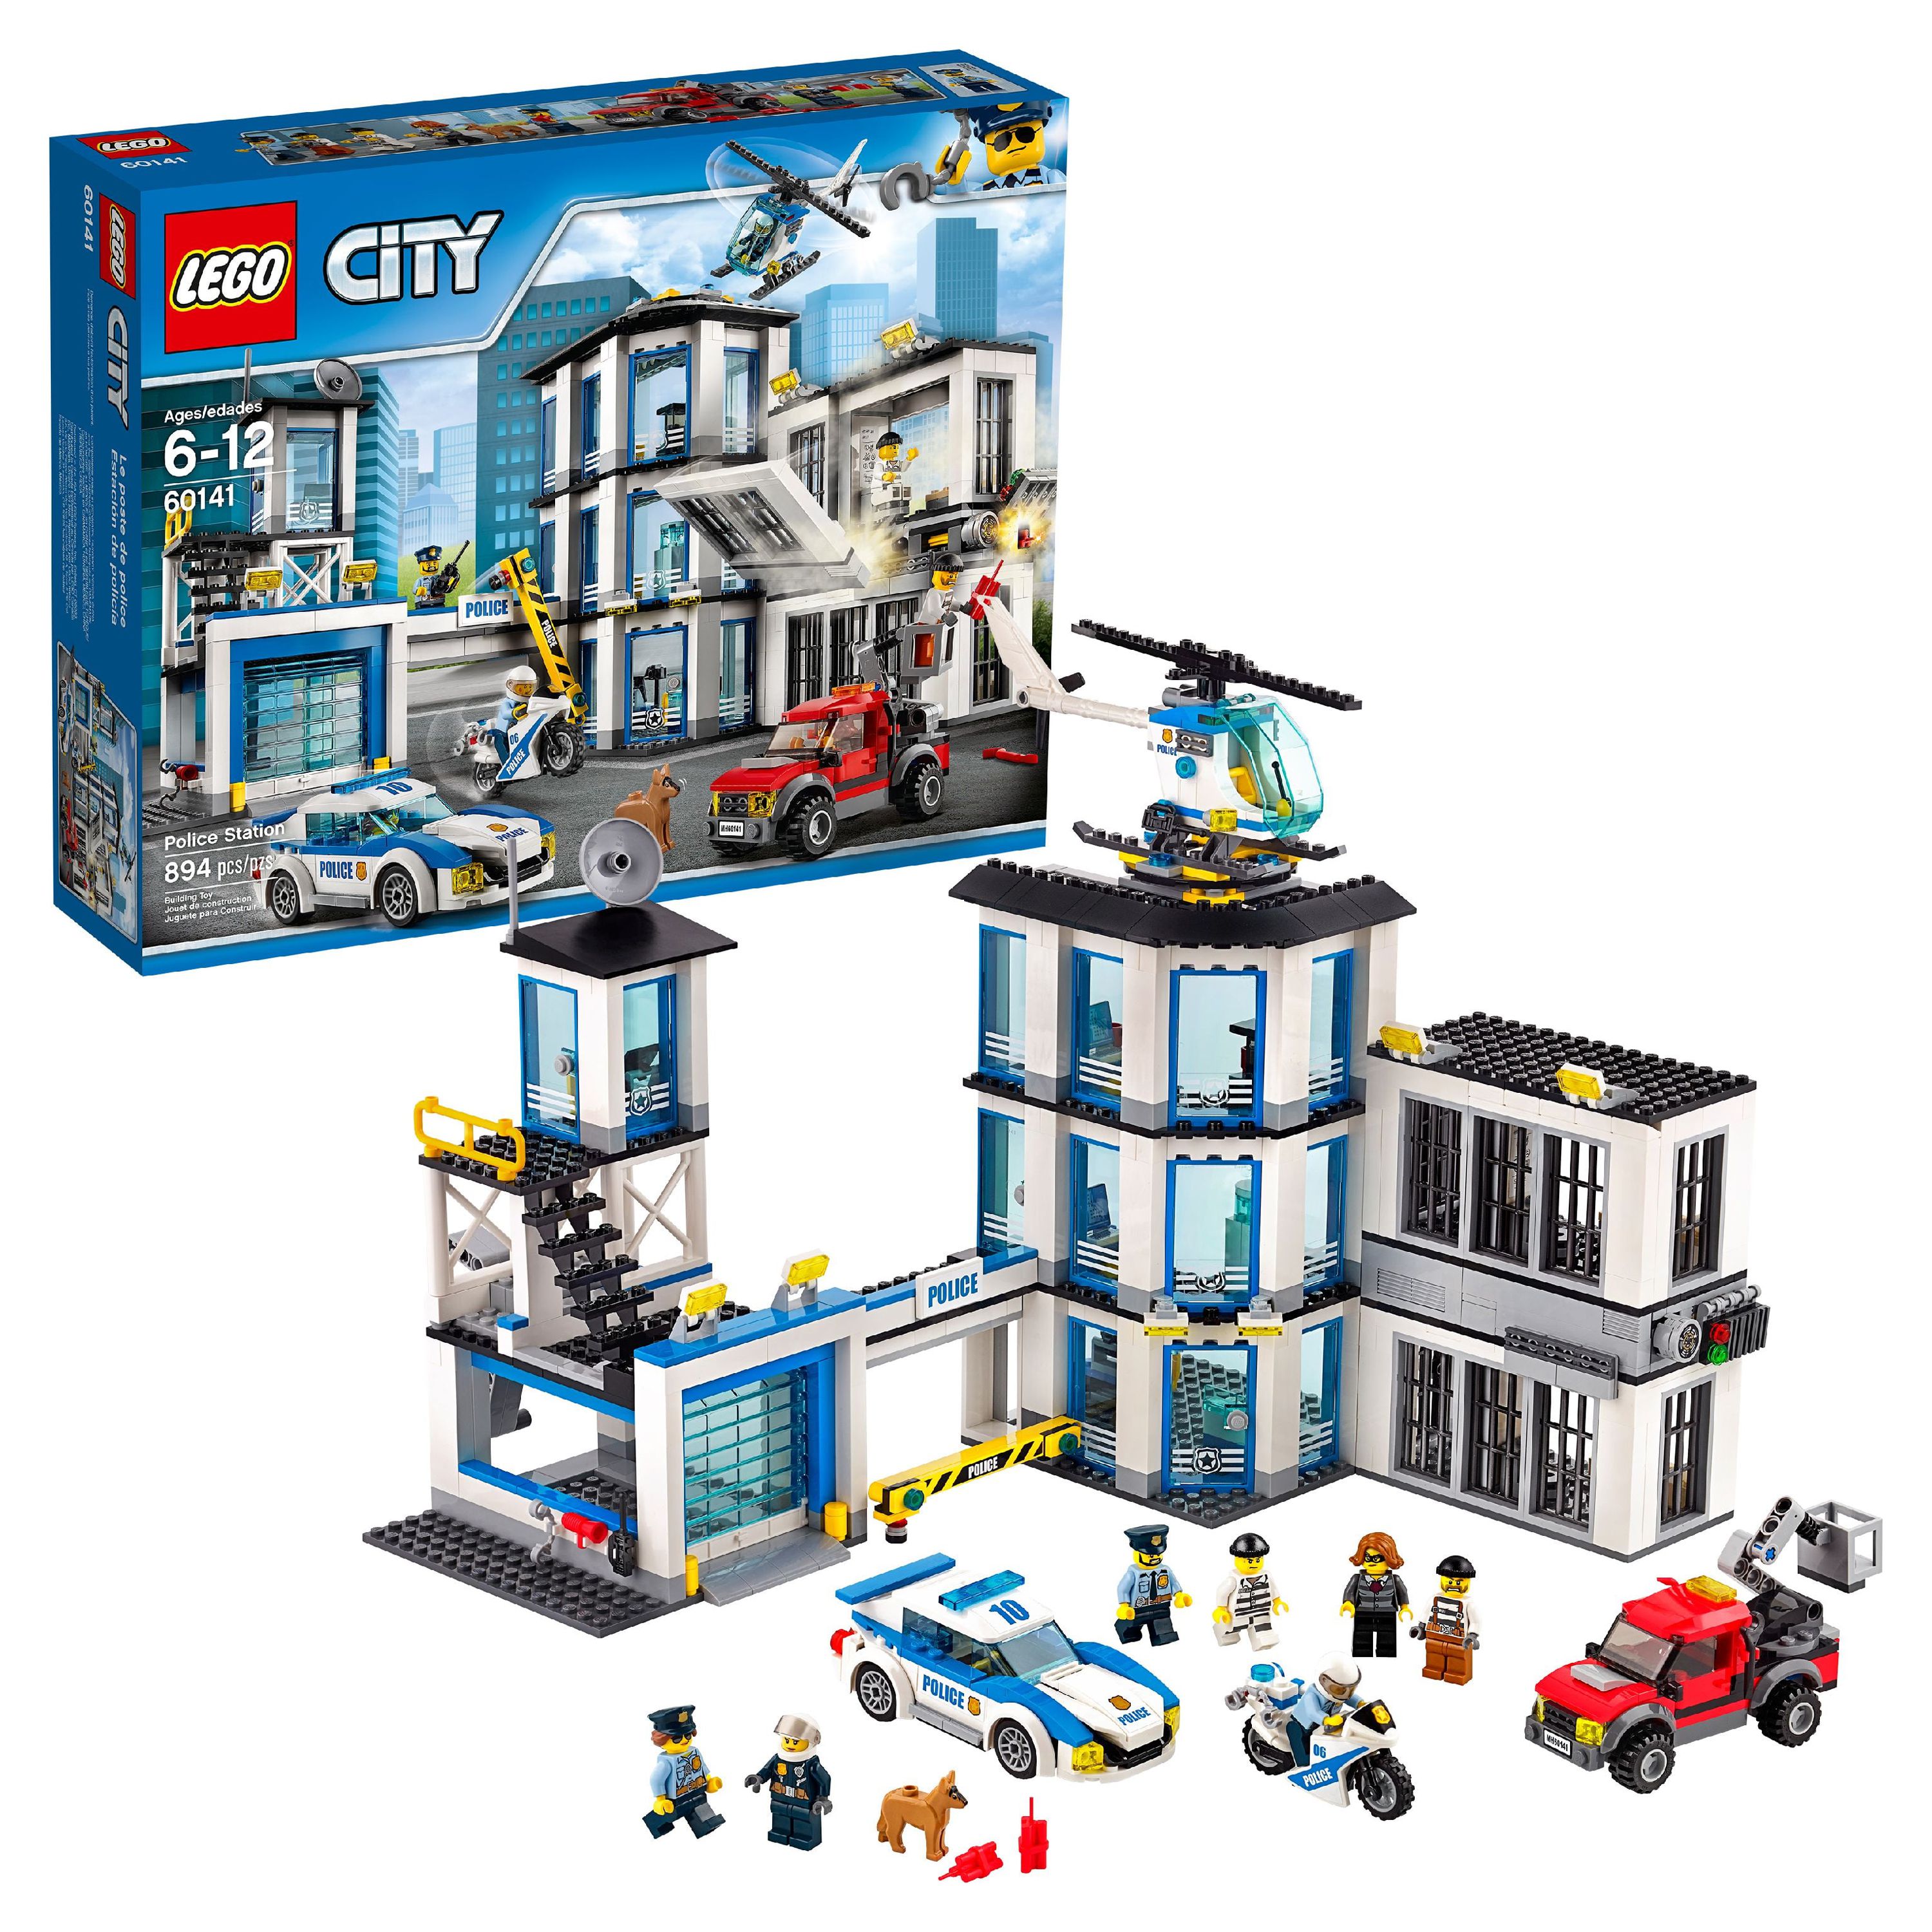 LEGO City Police Station 60141 Building Set (894 Pieces) - image 1 of 7